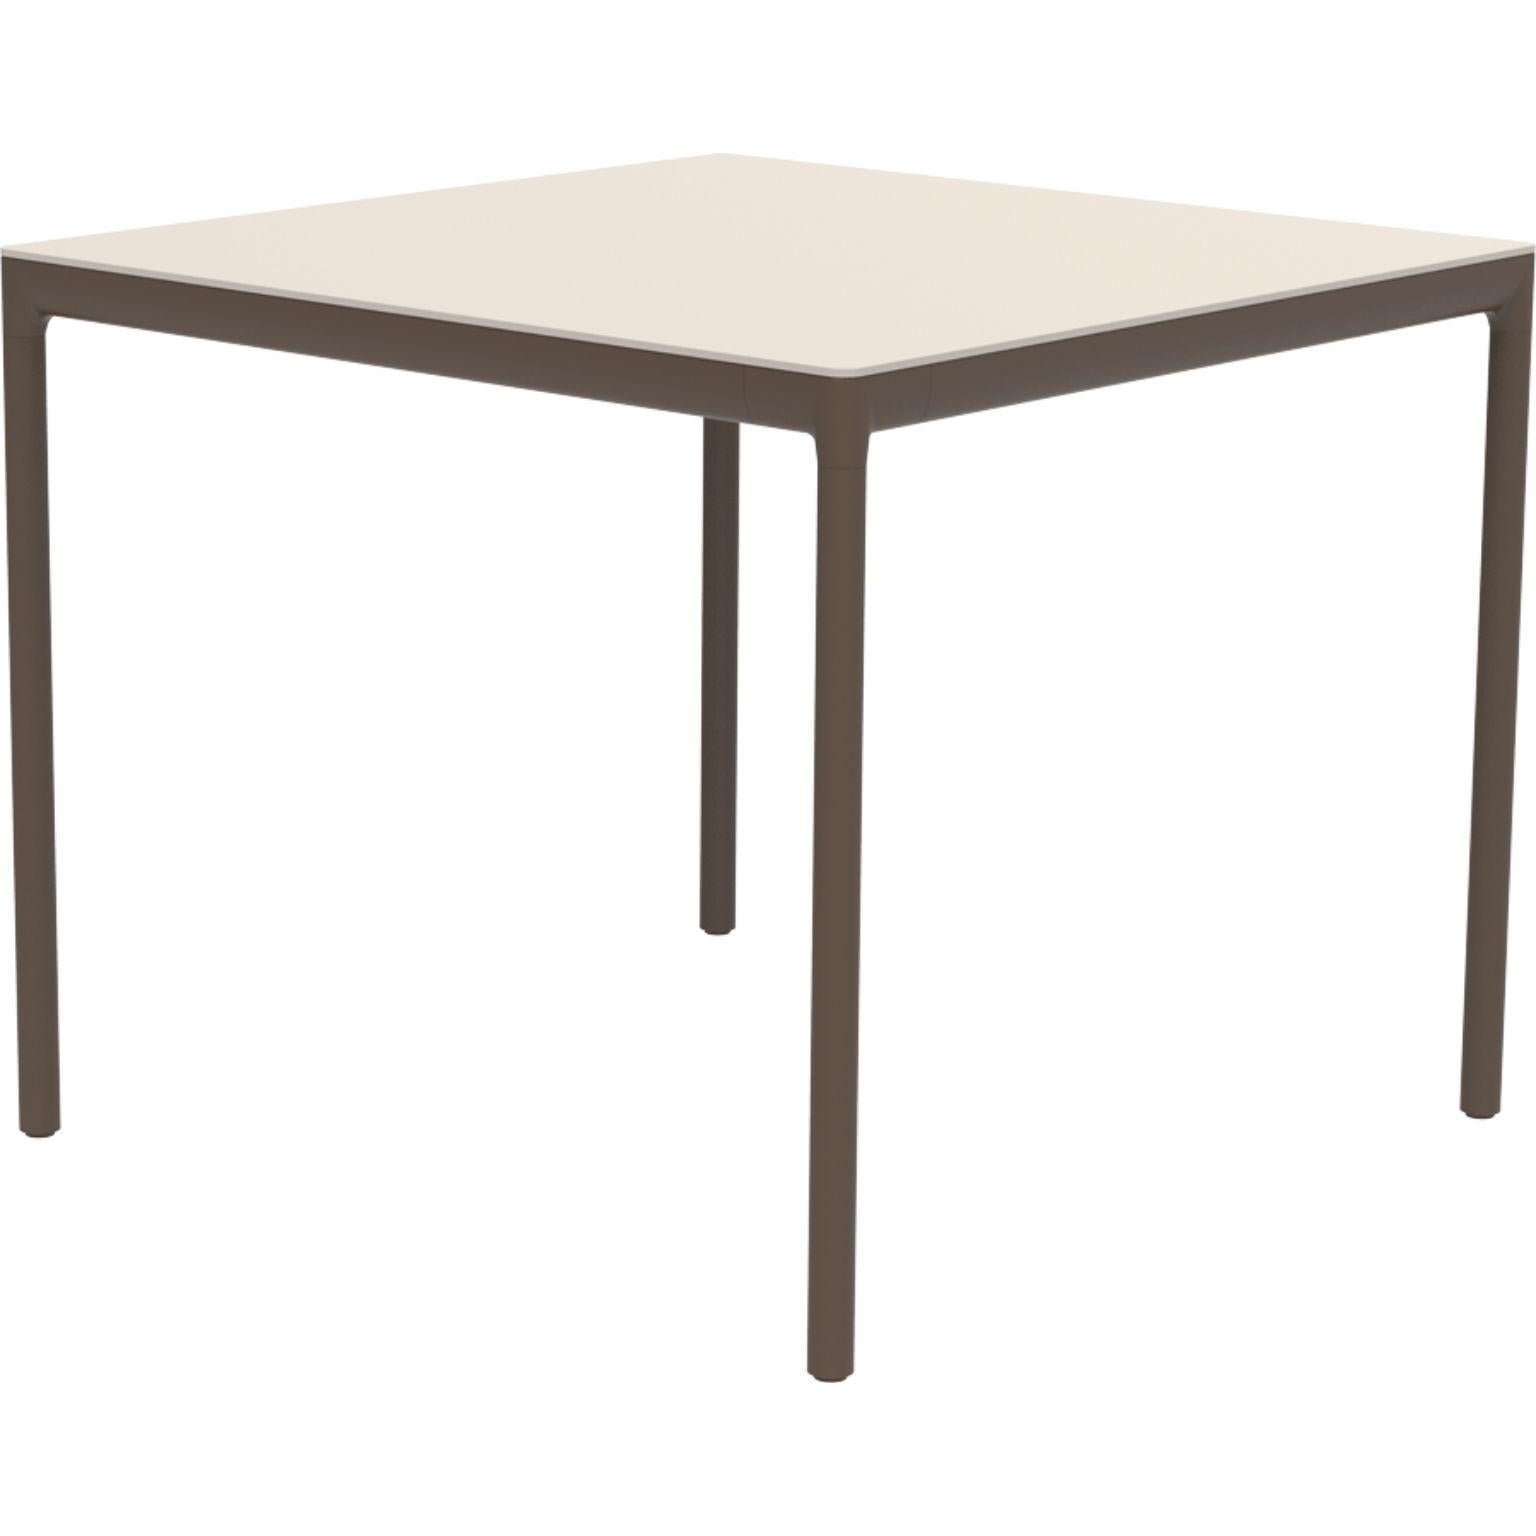 Ribbons bronze 90 table by MOWEE
Dimensions: D90 x W90 x H75 cm.
Material: Aluminium and HPL top.
Weight: 16 kg.
Also available in different colors and finishes. (HPL Black Edge or Neolith top). 

An unmistakable collection for its beauty and